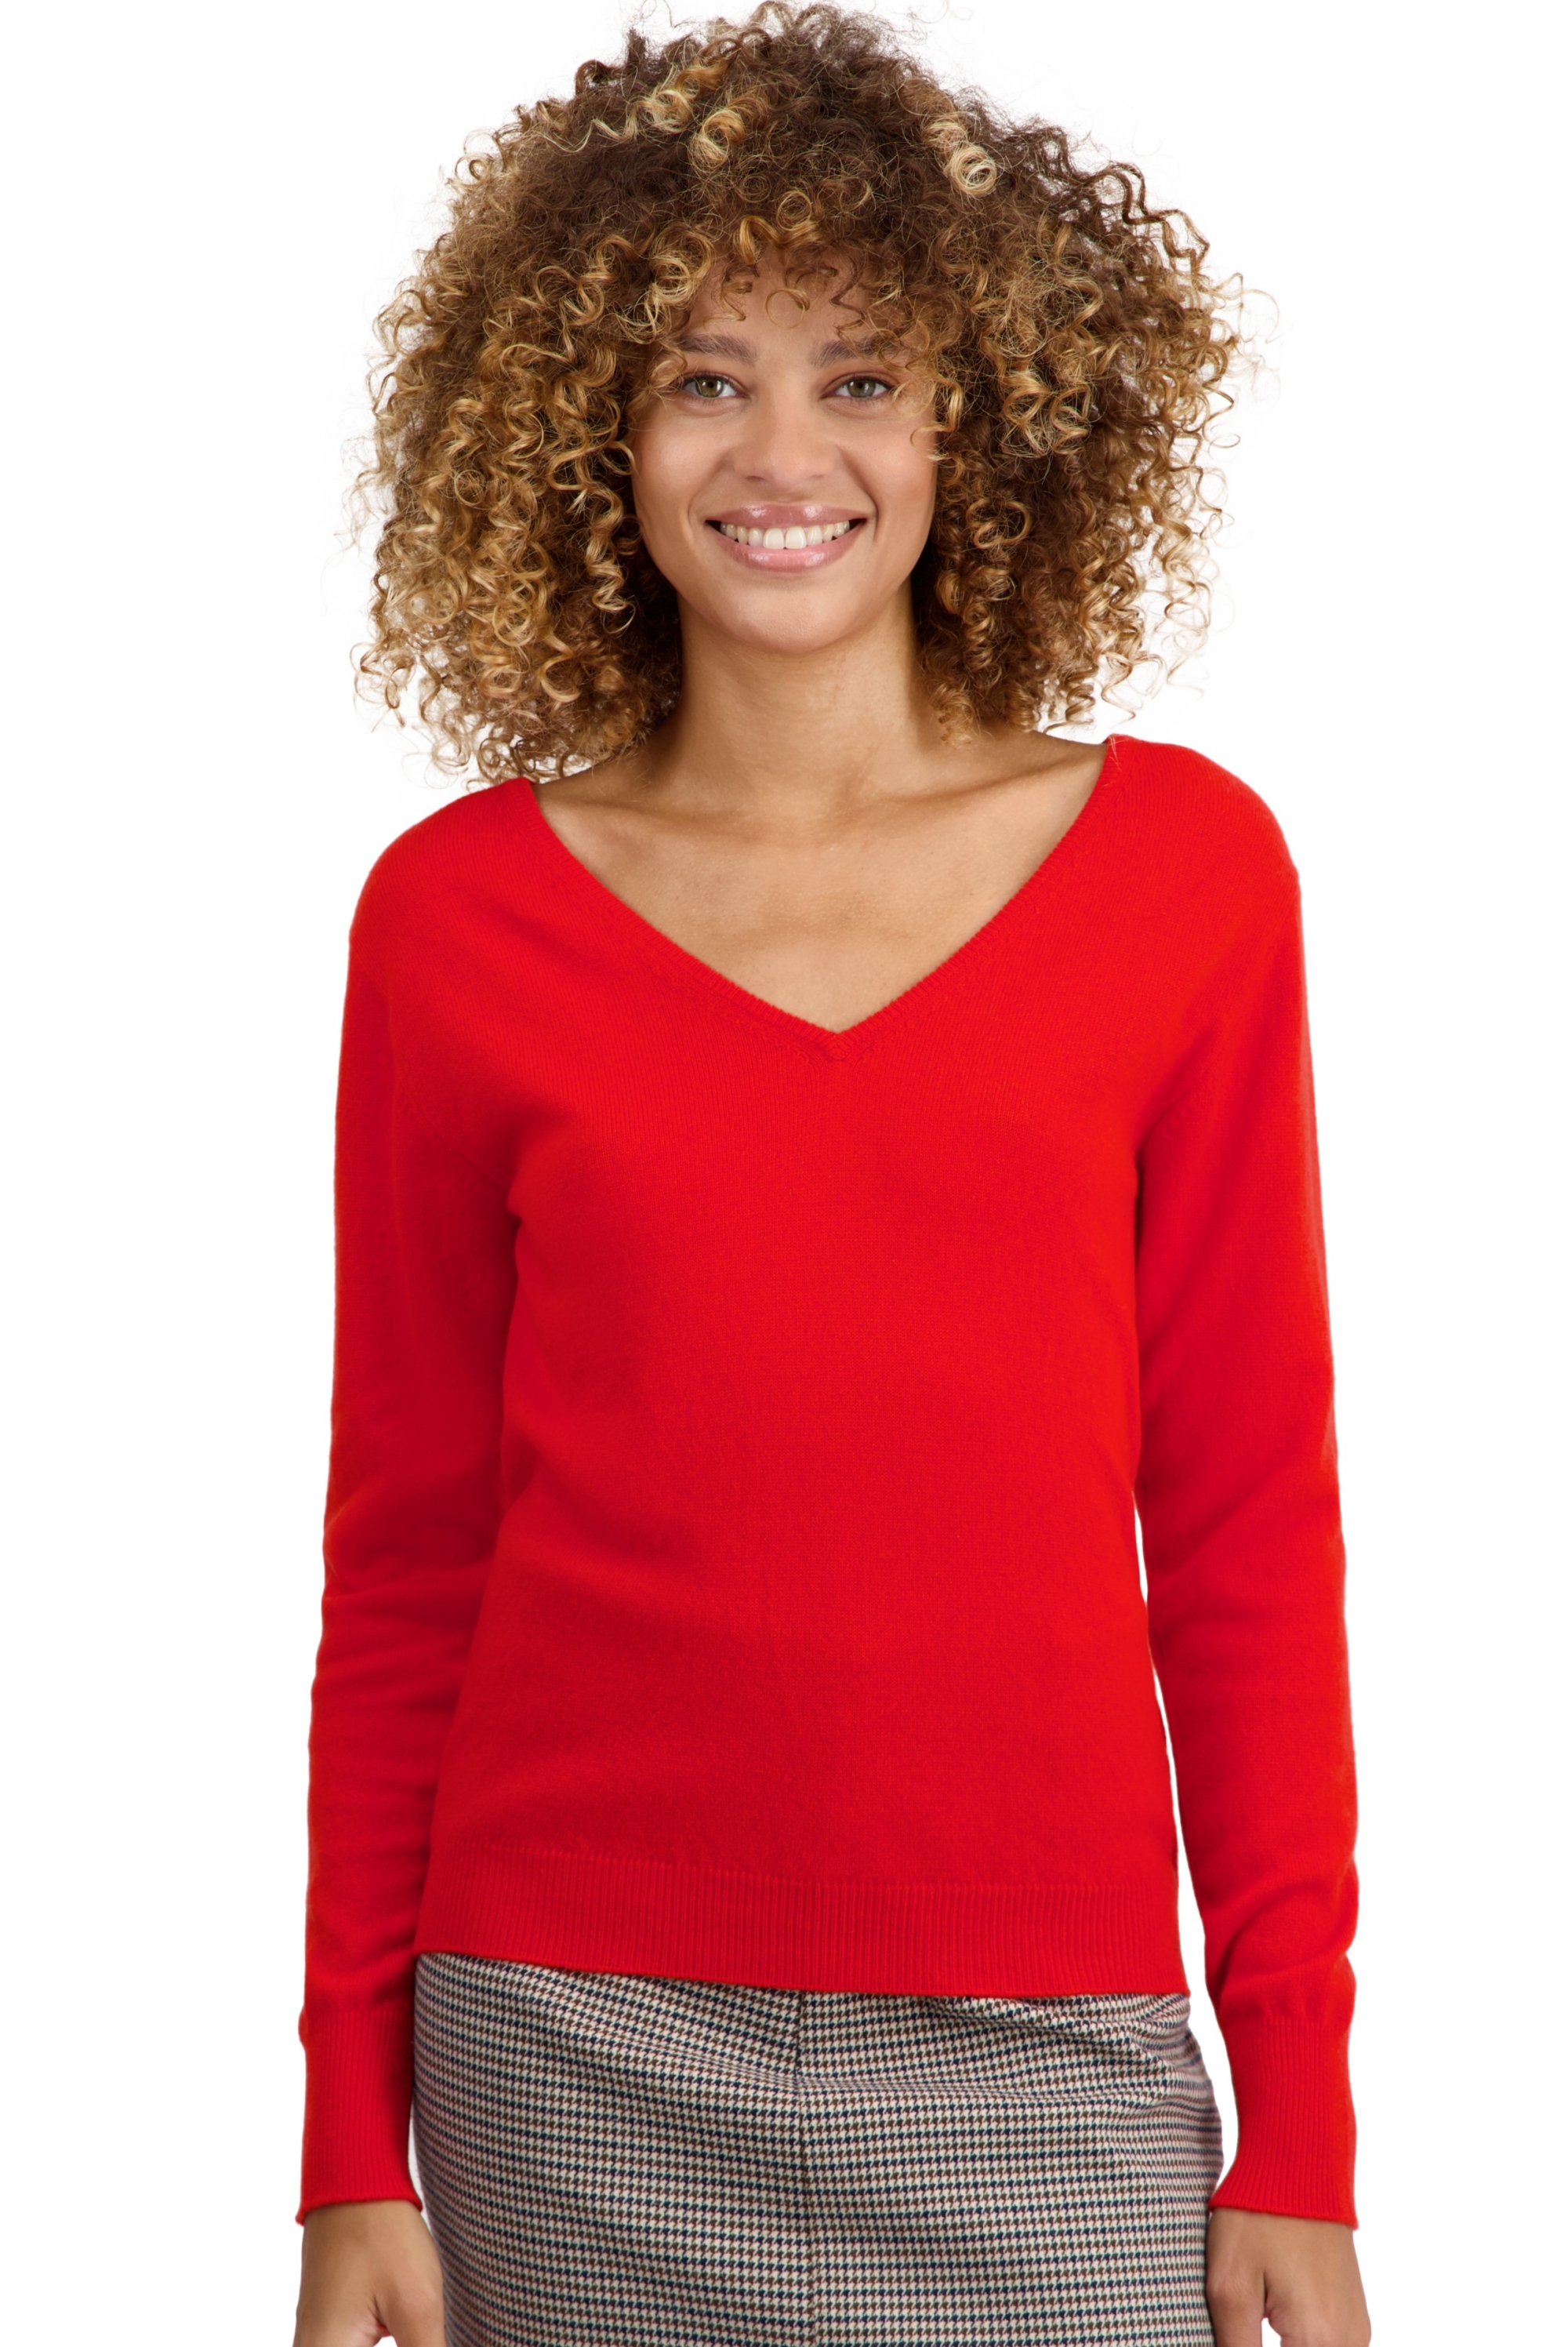 Cashmere ladies basic sweaters at low prices trieste first tomato s